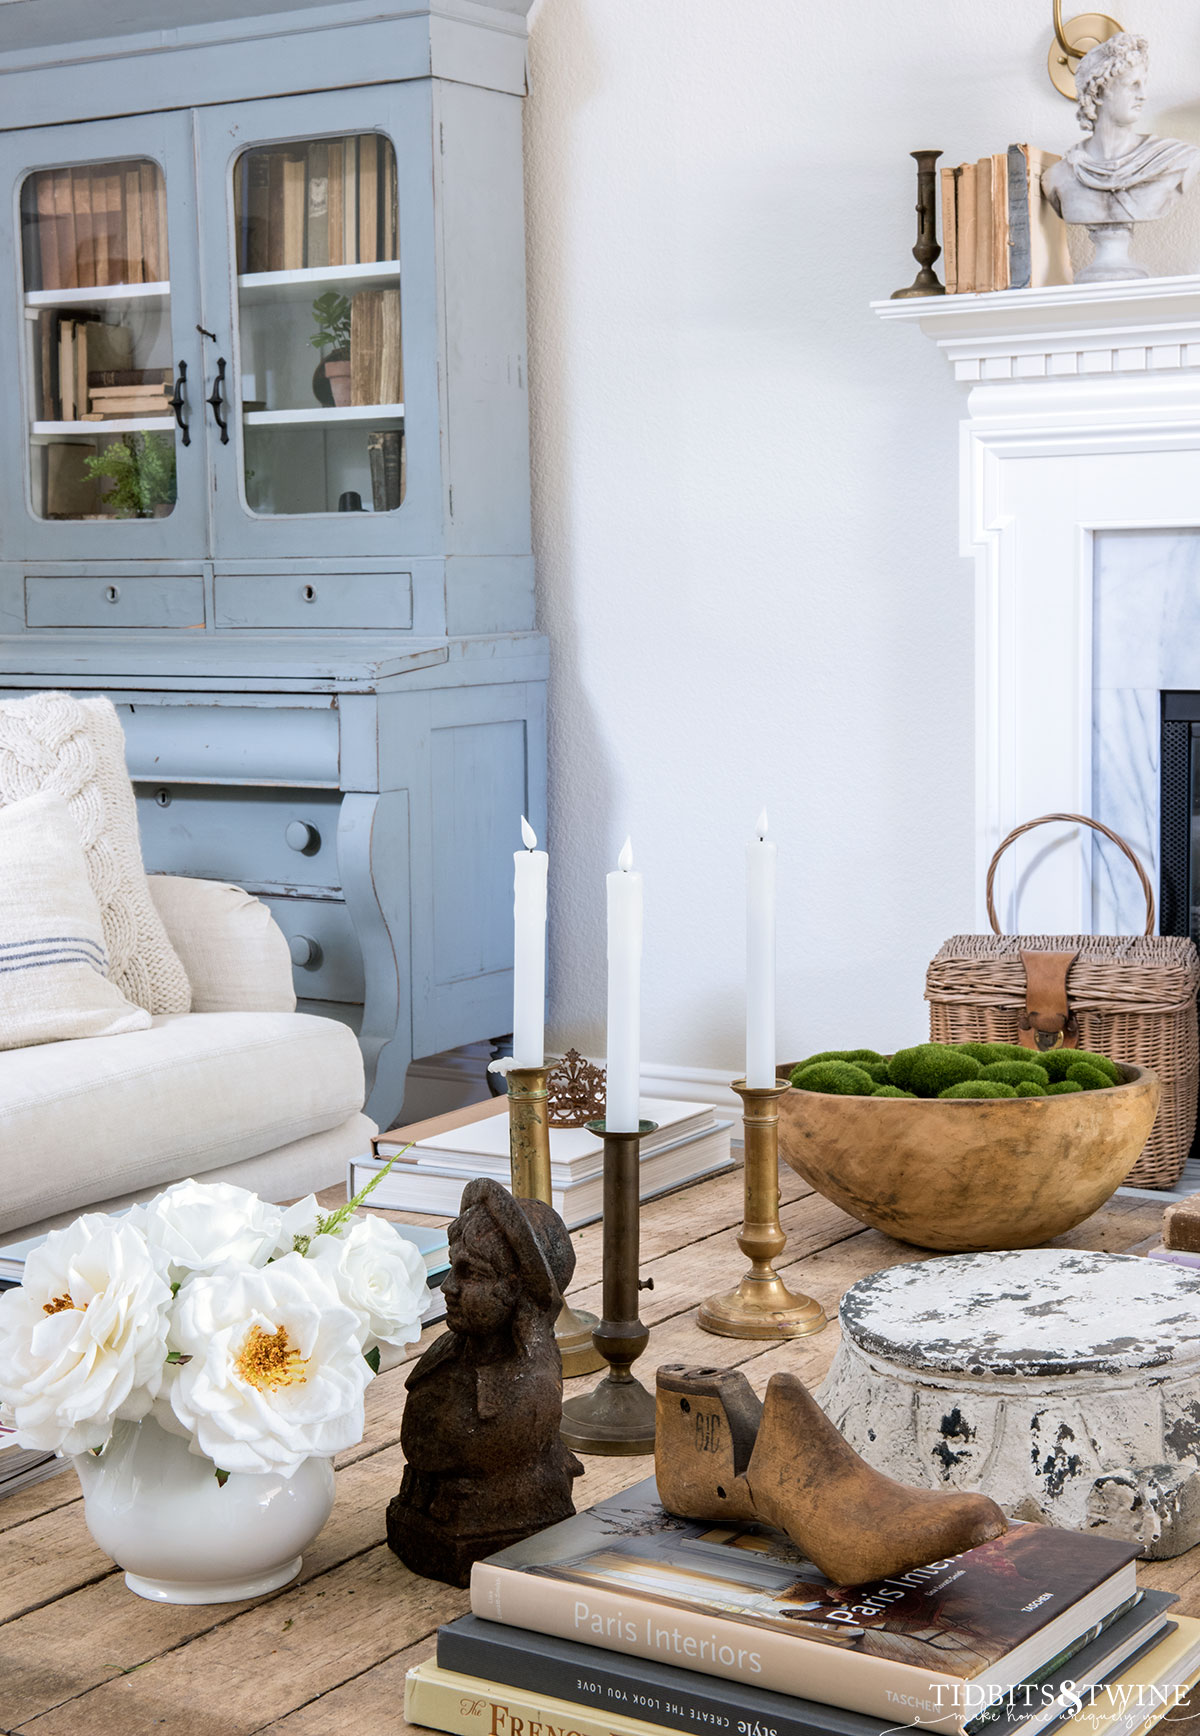 spring styled coffee table with sofa and antique blue hutch in the background